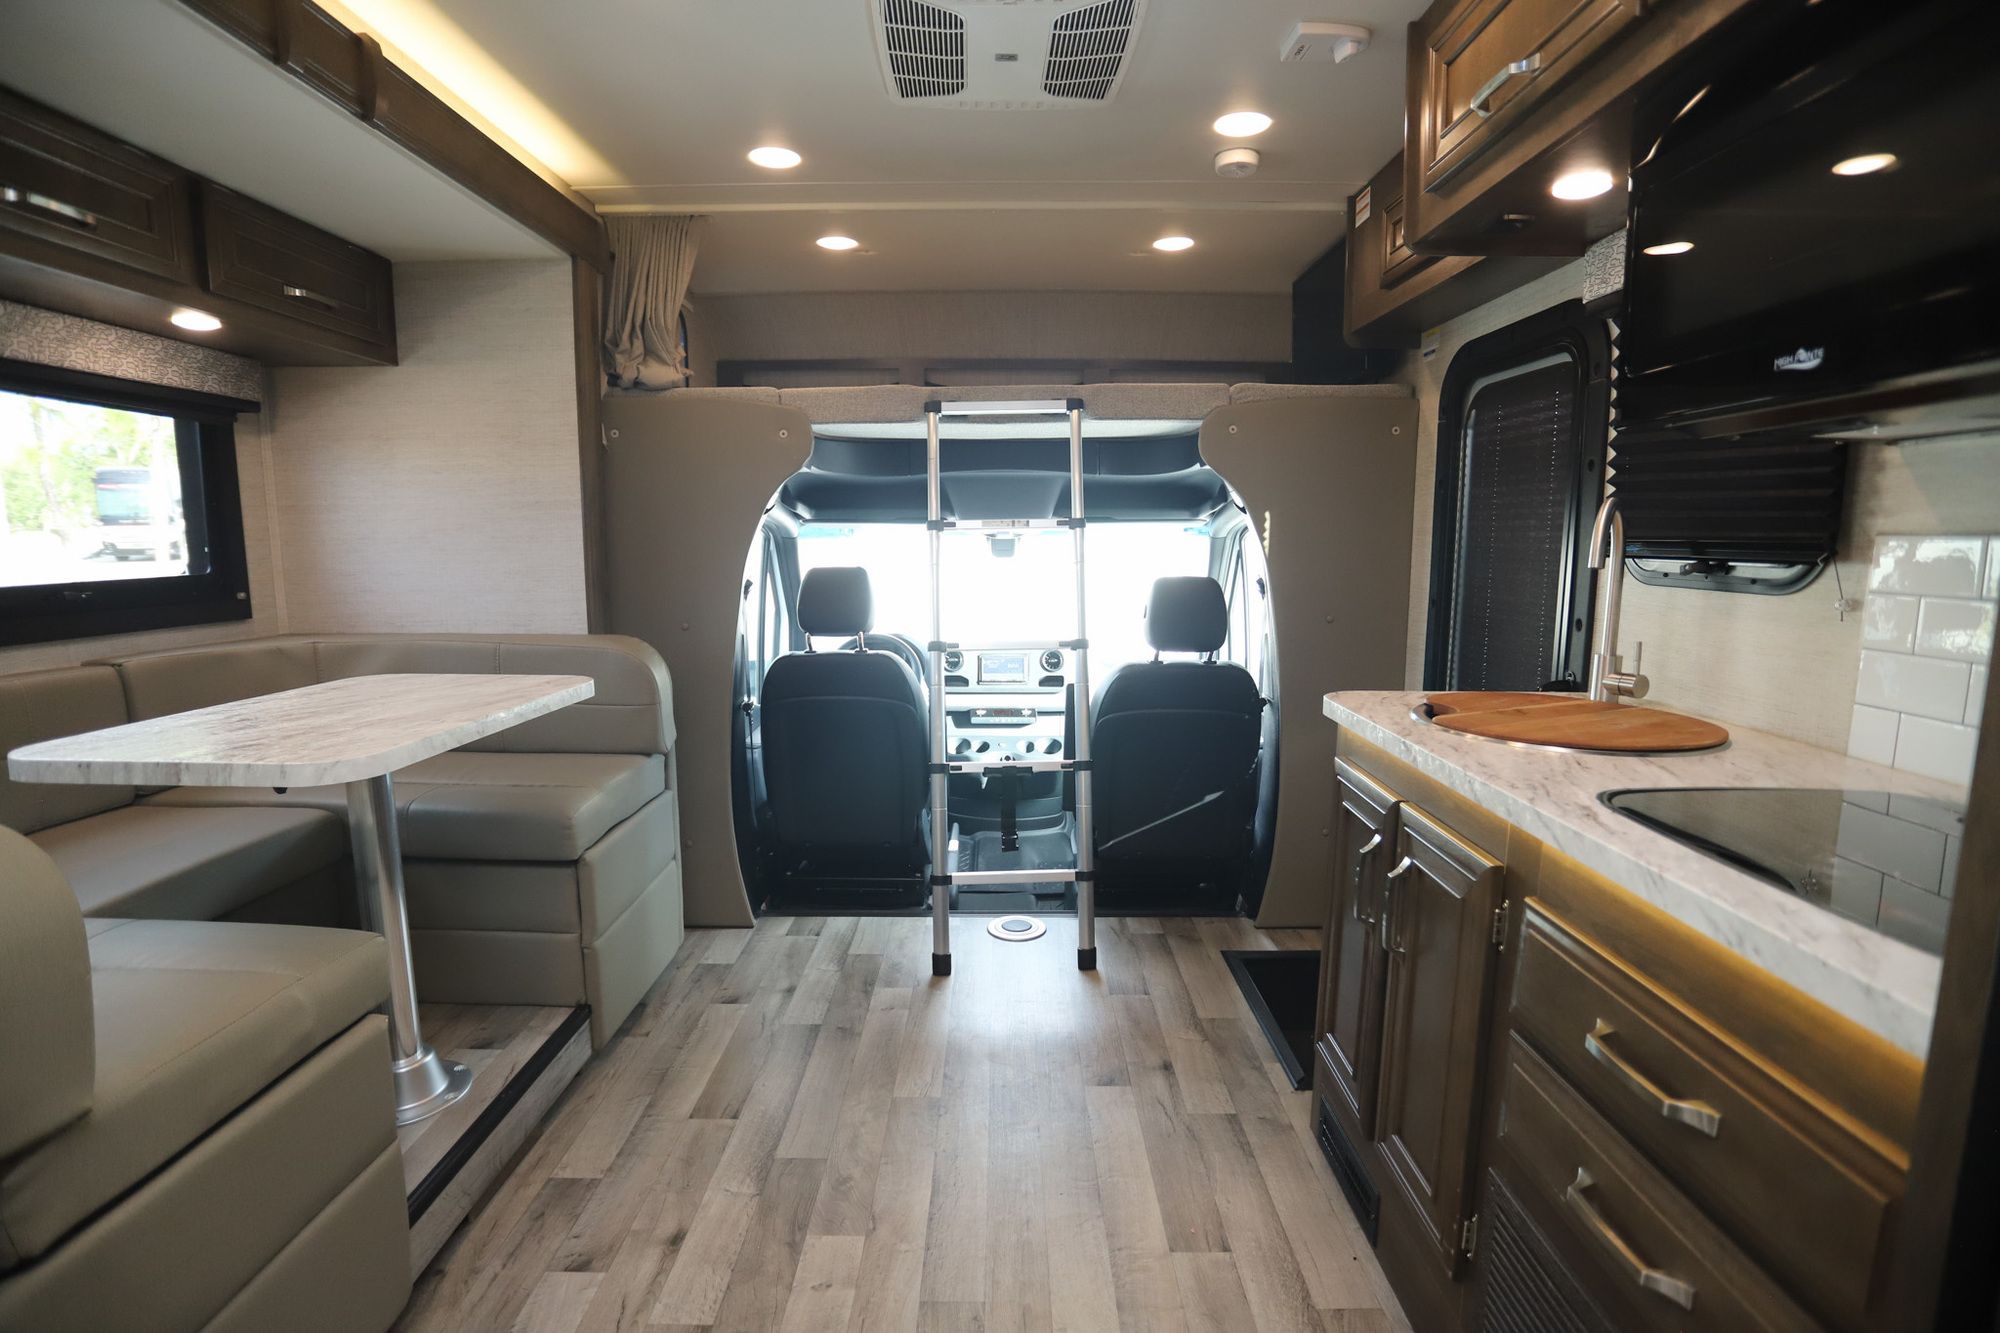 Used 2022 Jayco Melbourne 24L Class C  For Sale